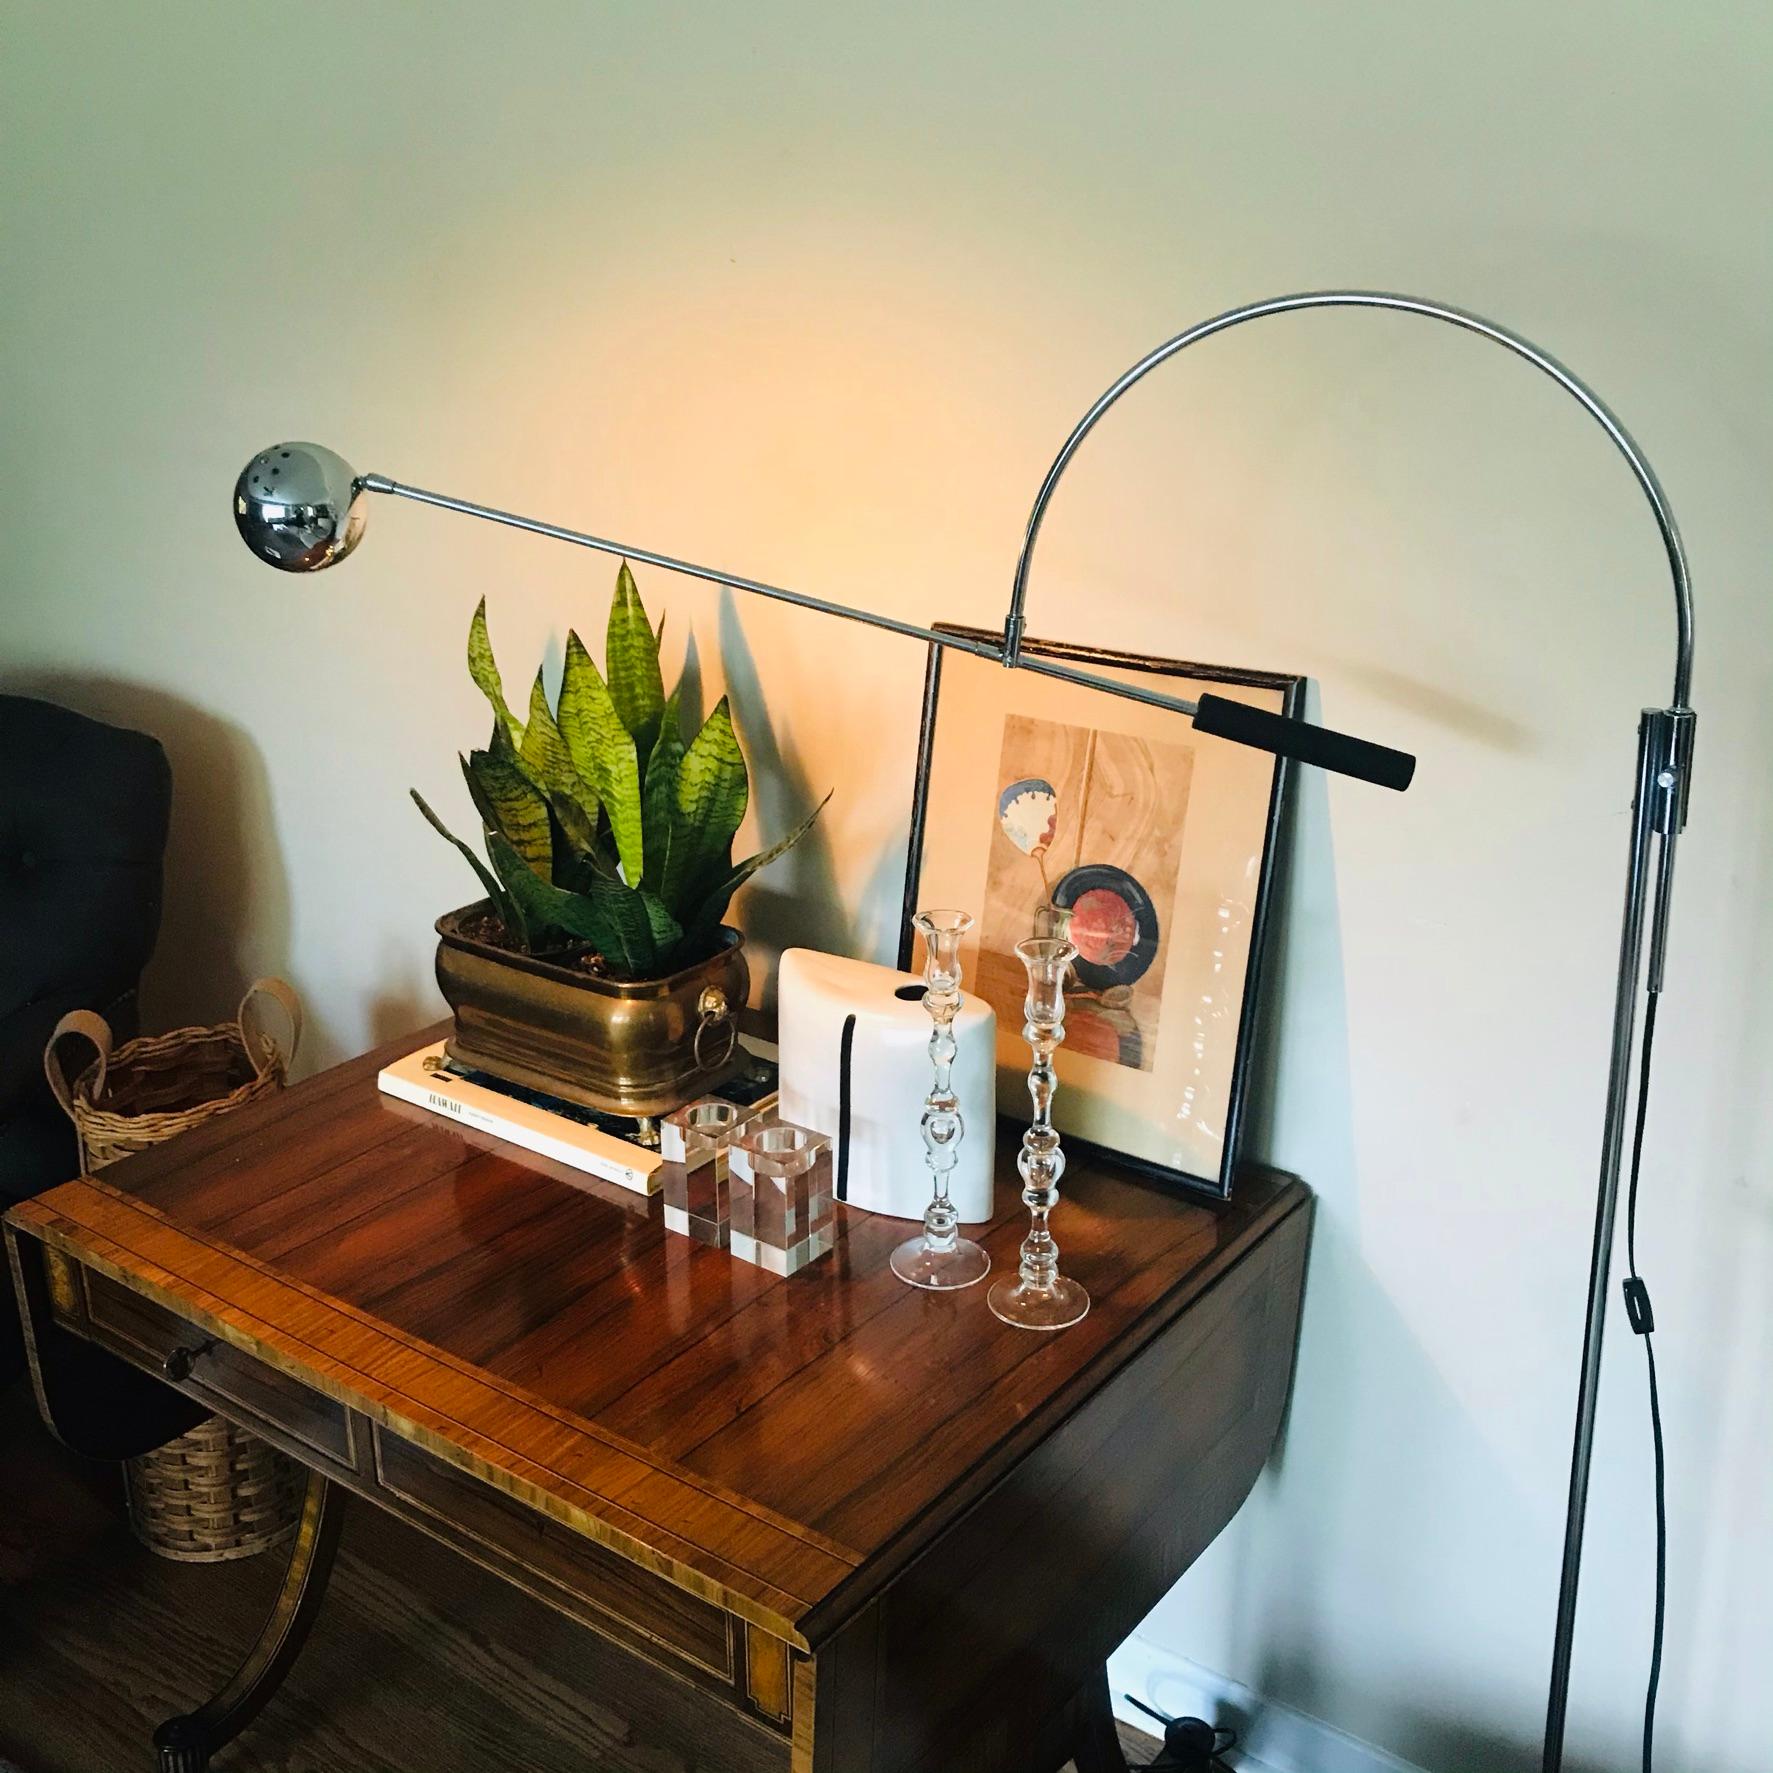 Amazing 60s architectural chrome arch floor lamp by Robert Sonneman. Known as the “Orbiter”, the design offers an articulating arm and eye socket. All original hardware. Chrome newly restored and in working. The floor lamp will provide a vintage